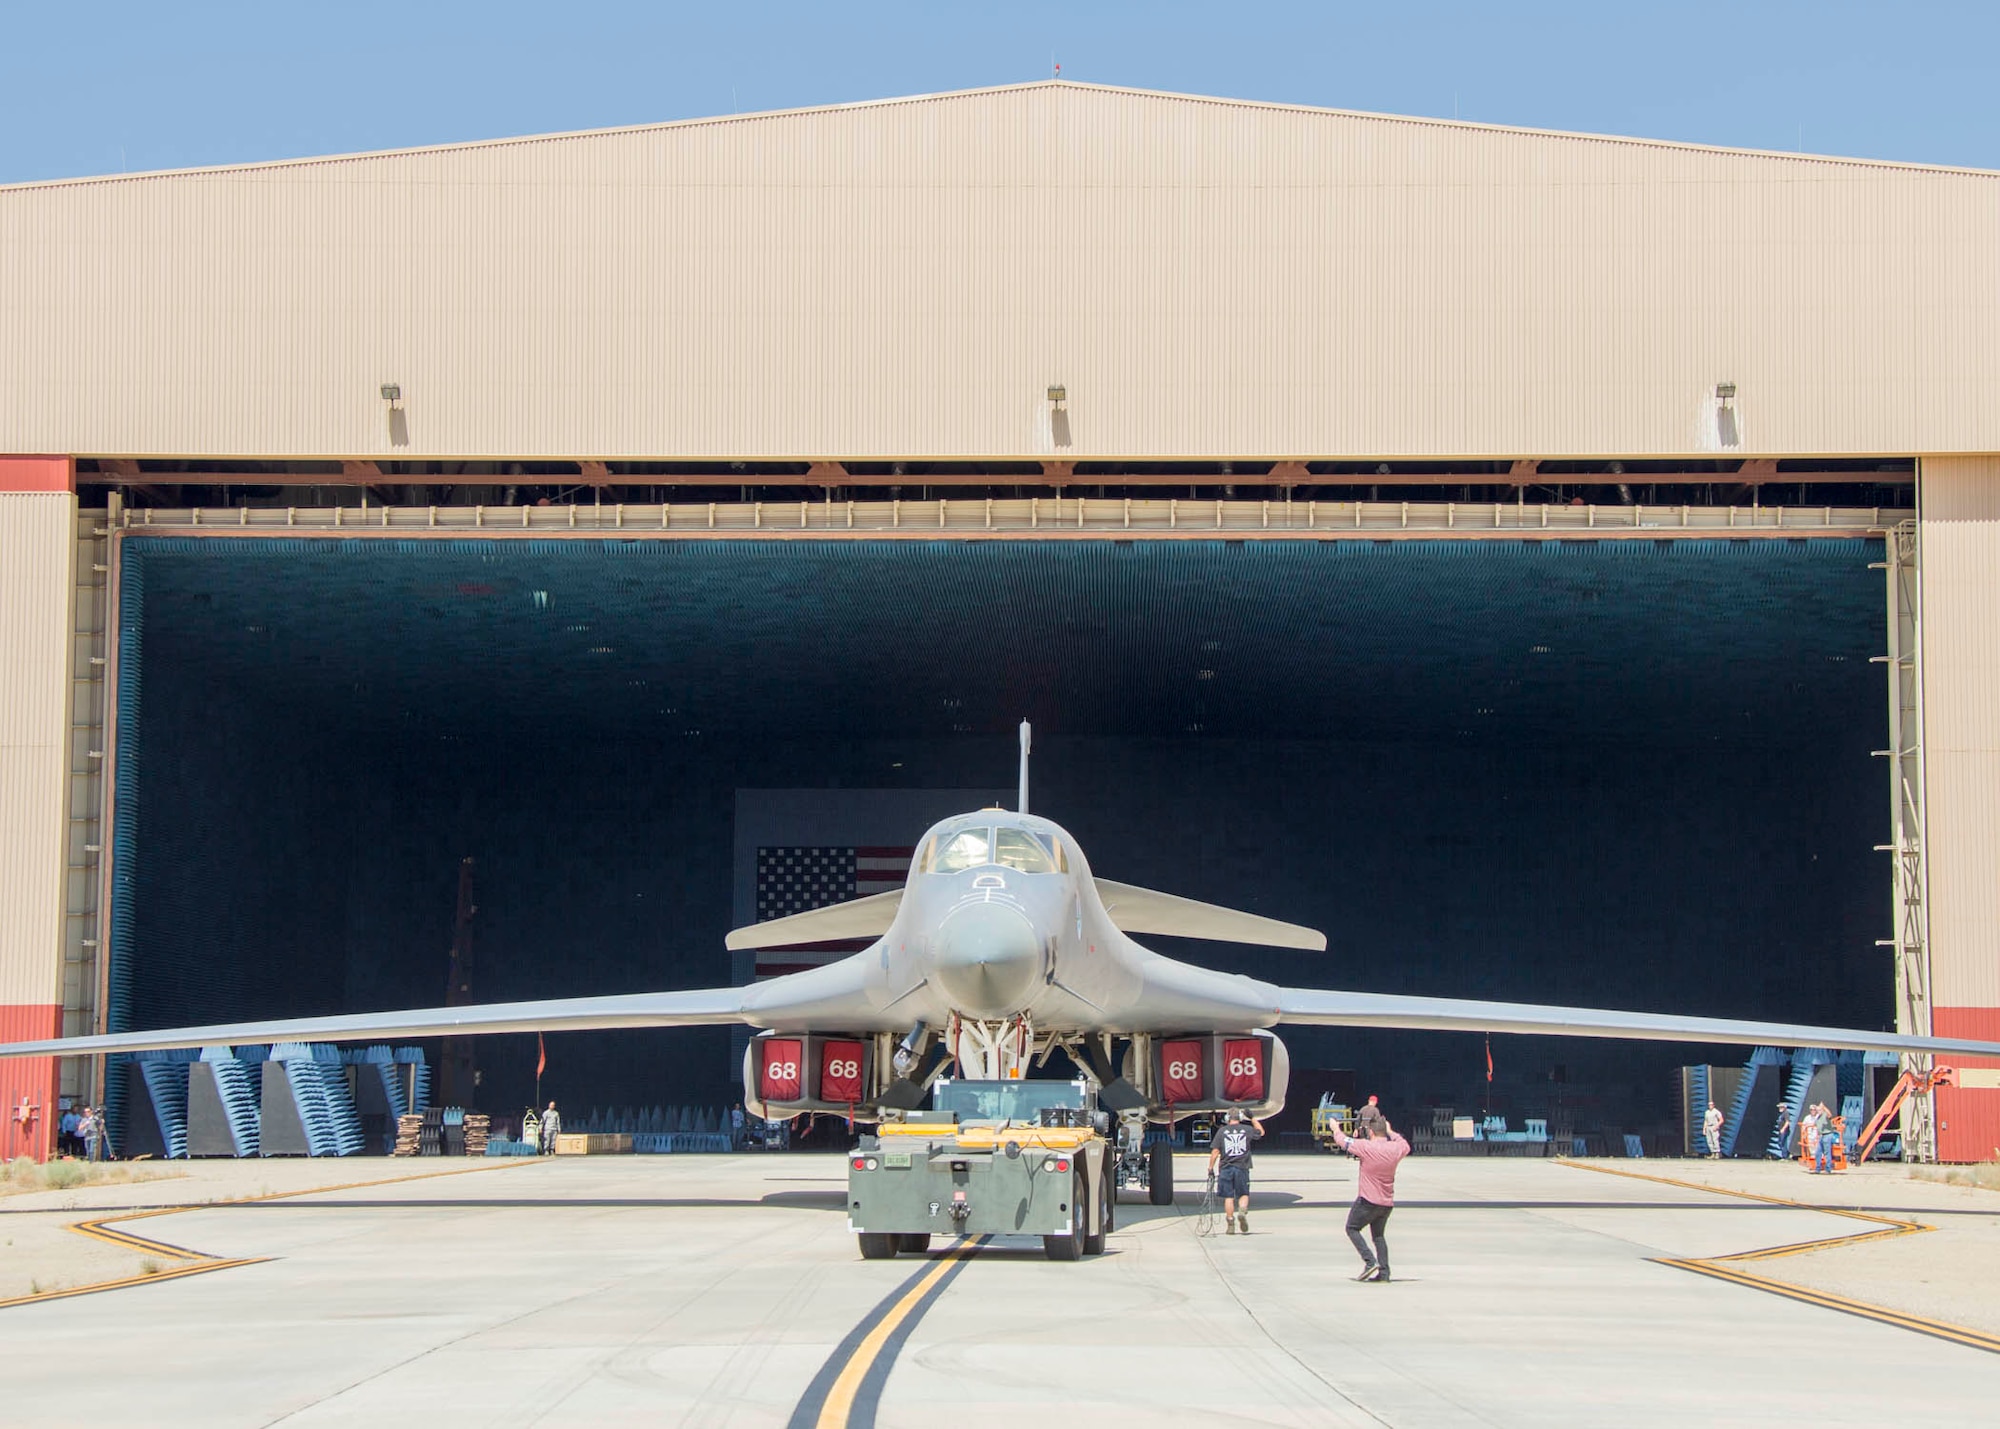 A B-1 Lancer is positioned inside the Benefield Anechoic Facility on Edwards Air Force Base, California, in preparation for a series of electronic warfare tests, July 27, 2016. The BAF provides a "free space" for engineers to conduct electronic warfare tests without external radio frequency interference. (U.S. Air Force photo by Christopher Okula)